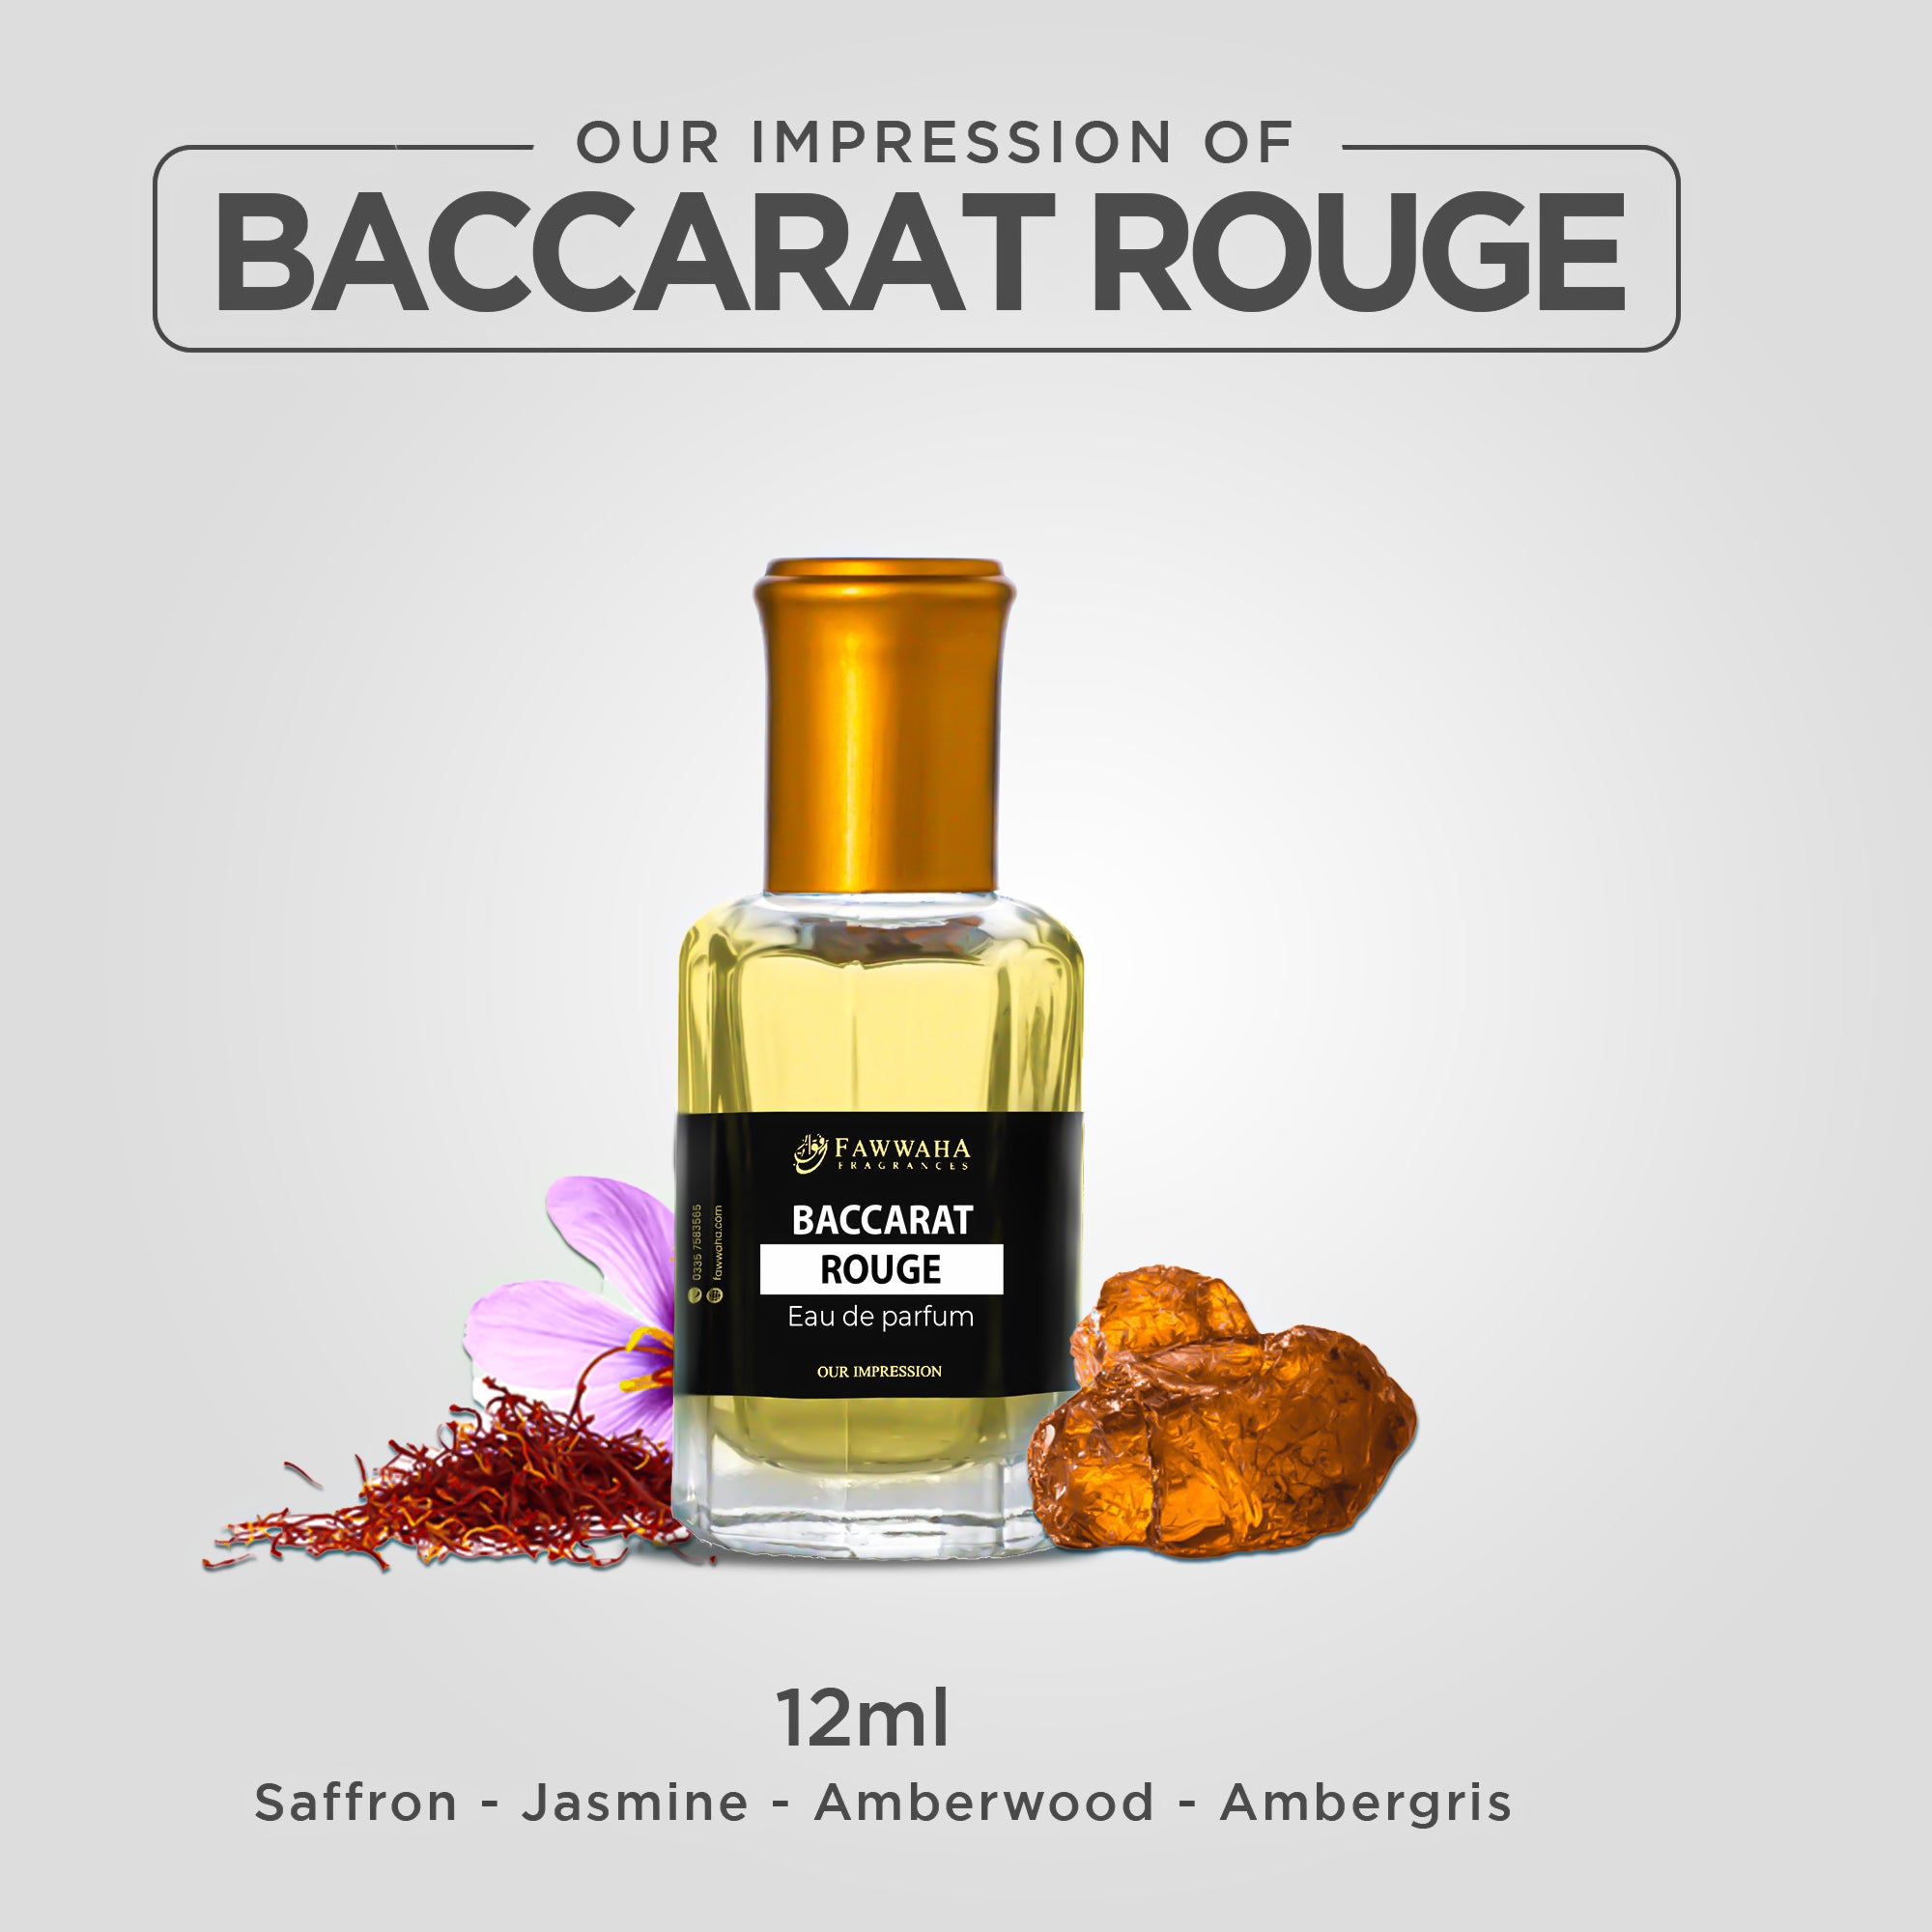 RAAZ (OUR IMPRESSION OF BACCARAT ROUGE 540) (12 ML)